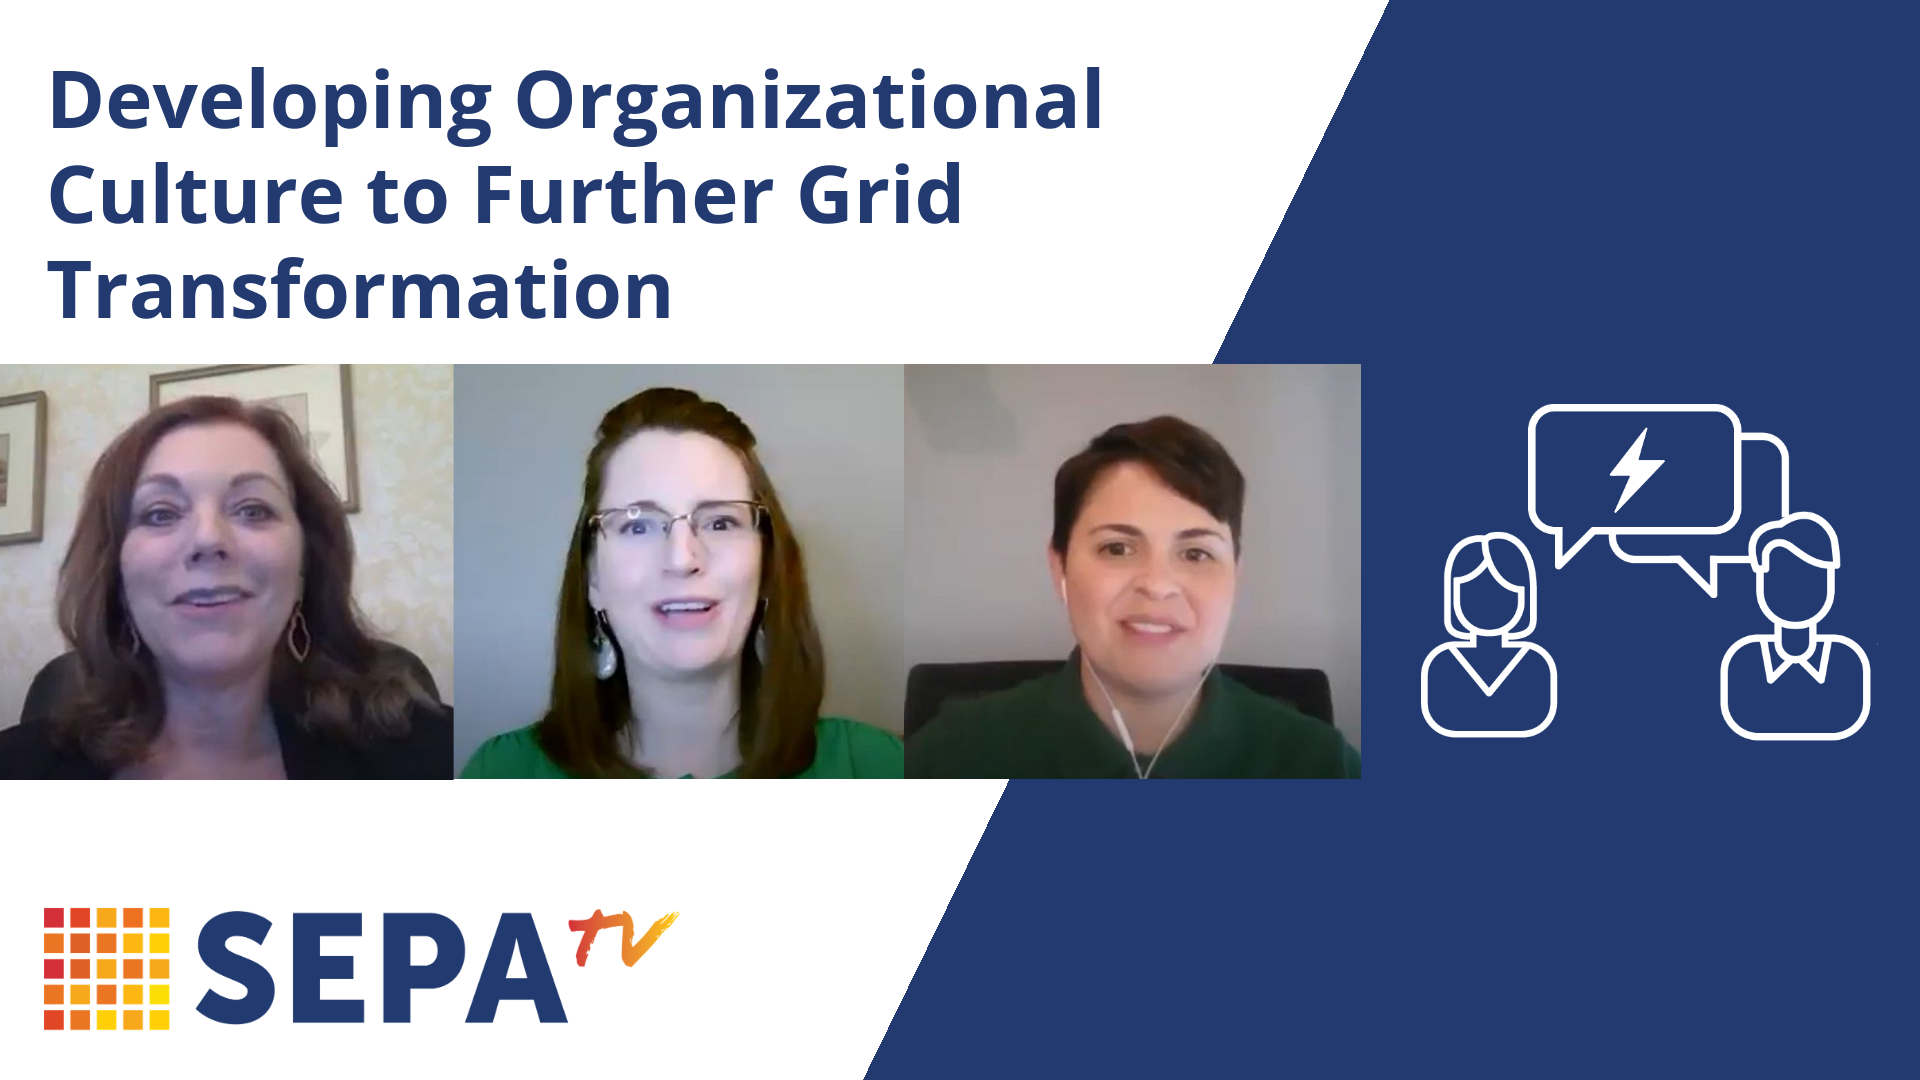 Developing Organizational Culture to Further Grid Transformation